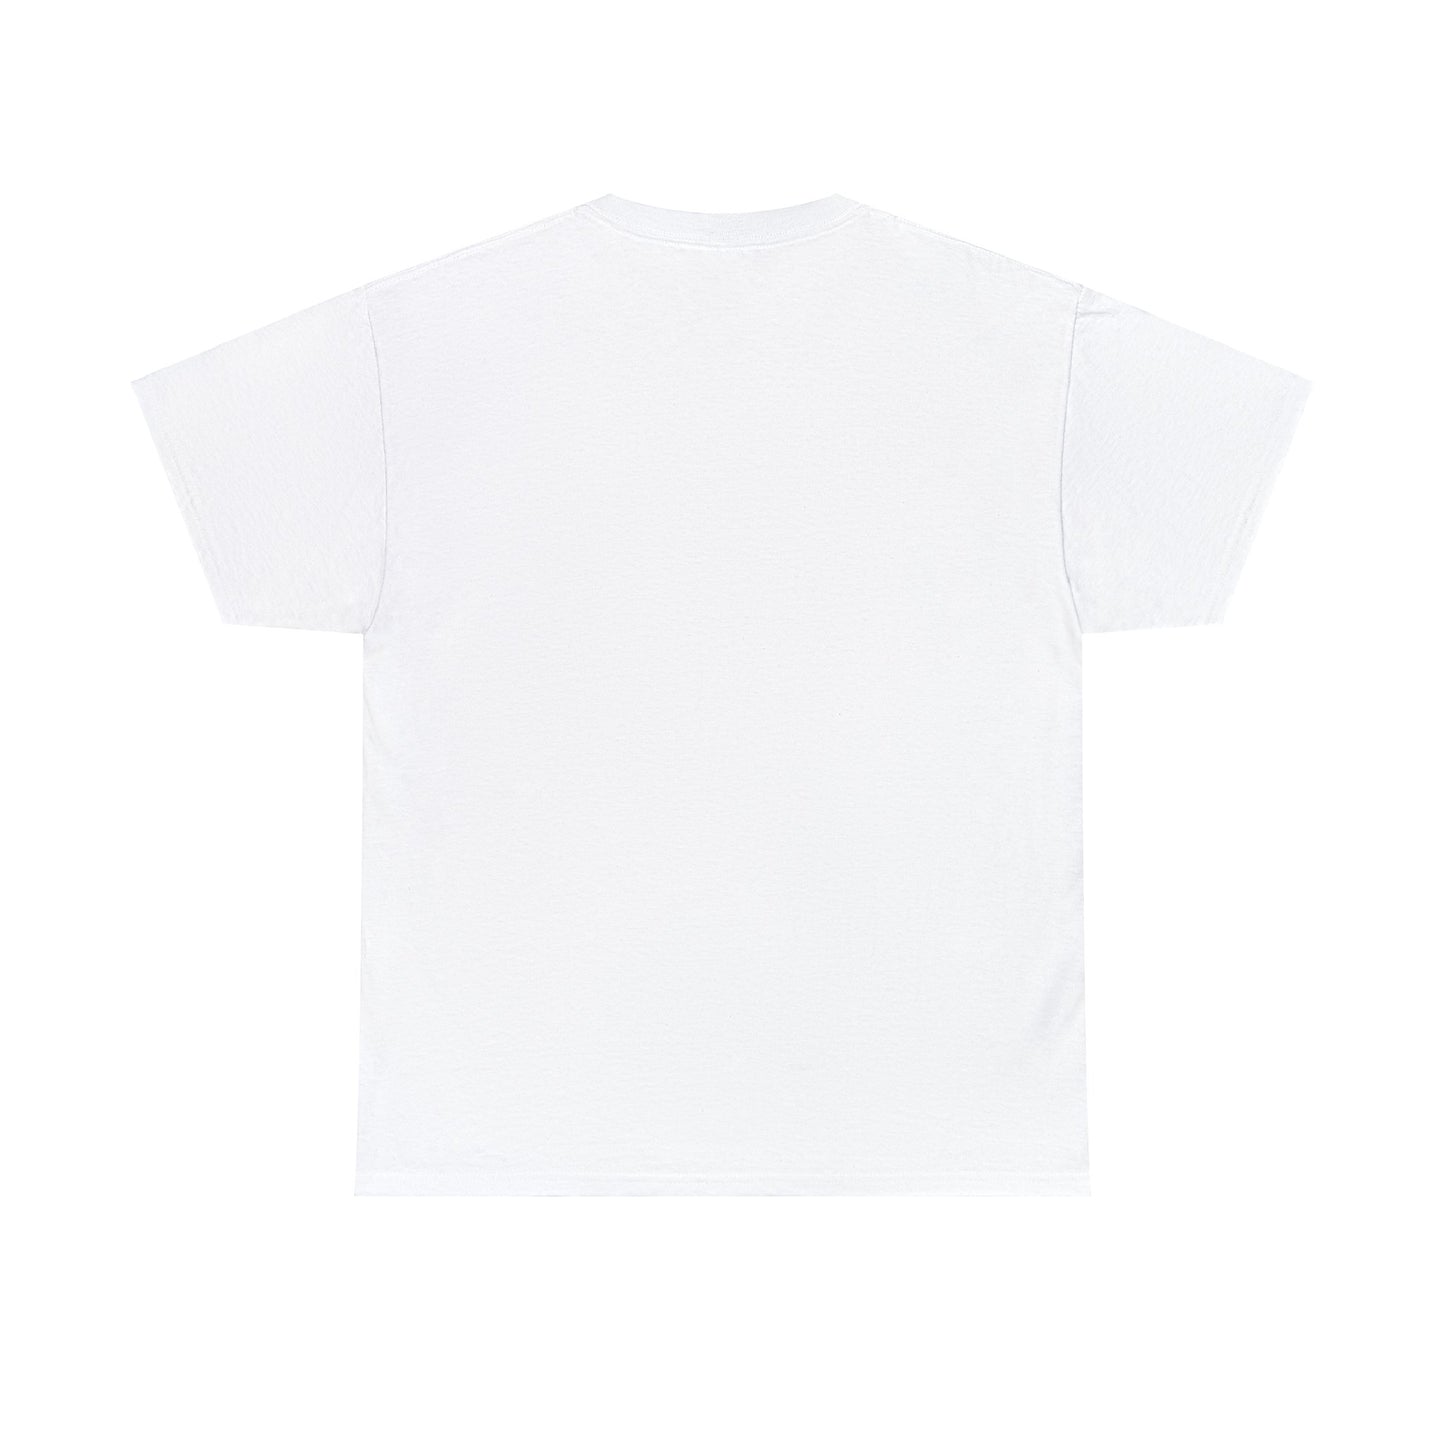 TOPOCK SMALL TOWN ON FRONT Unisex Heavy Cotton Tee